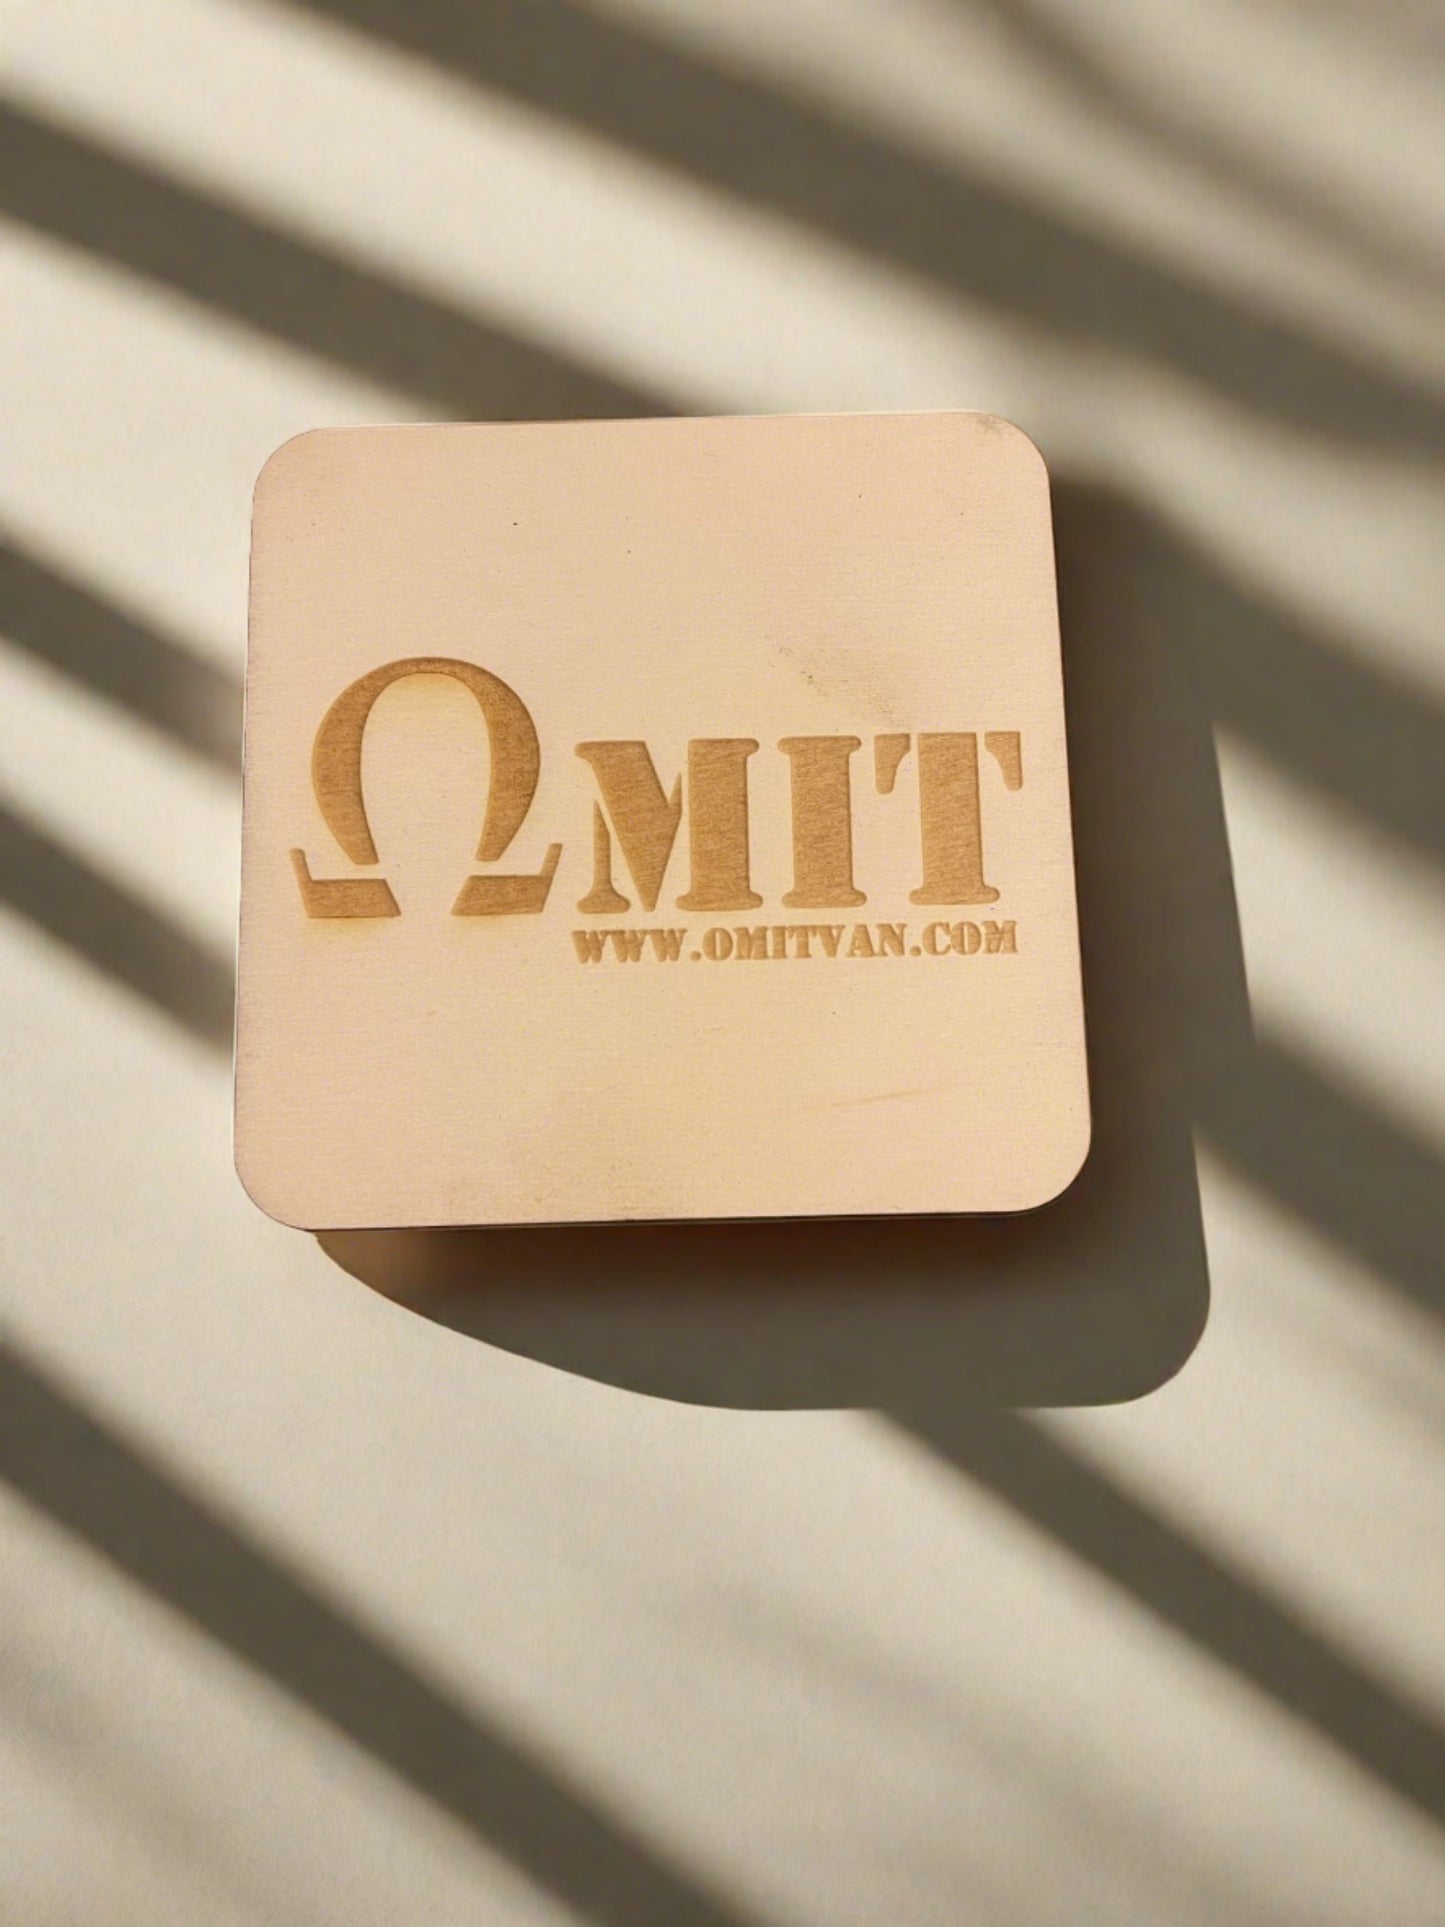 OMIT Table Coaster Laser Engraved Wood Or Acrylic SET OF 4